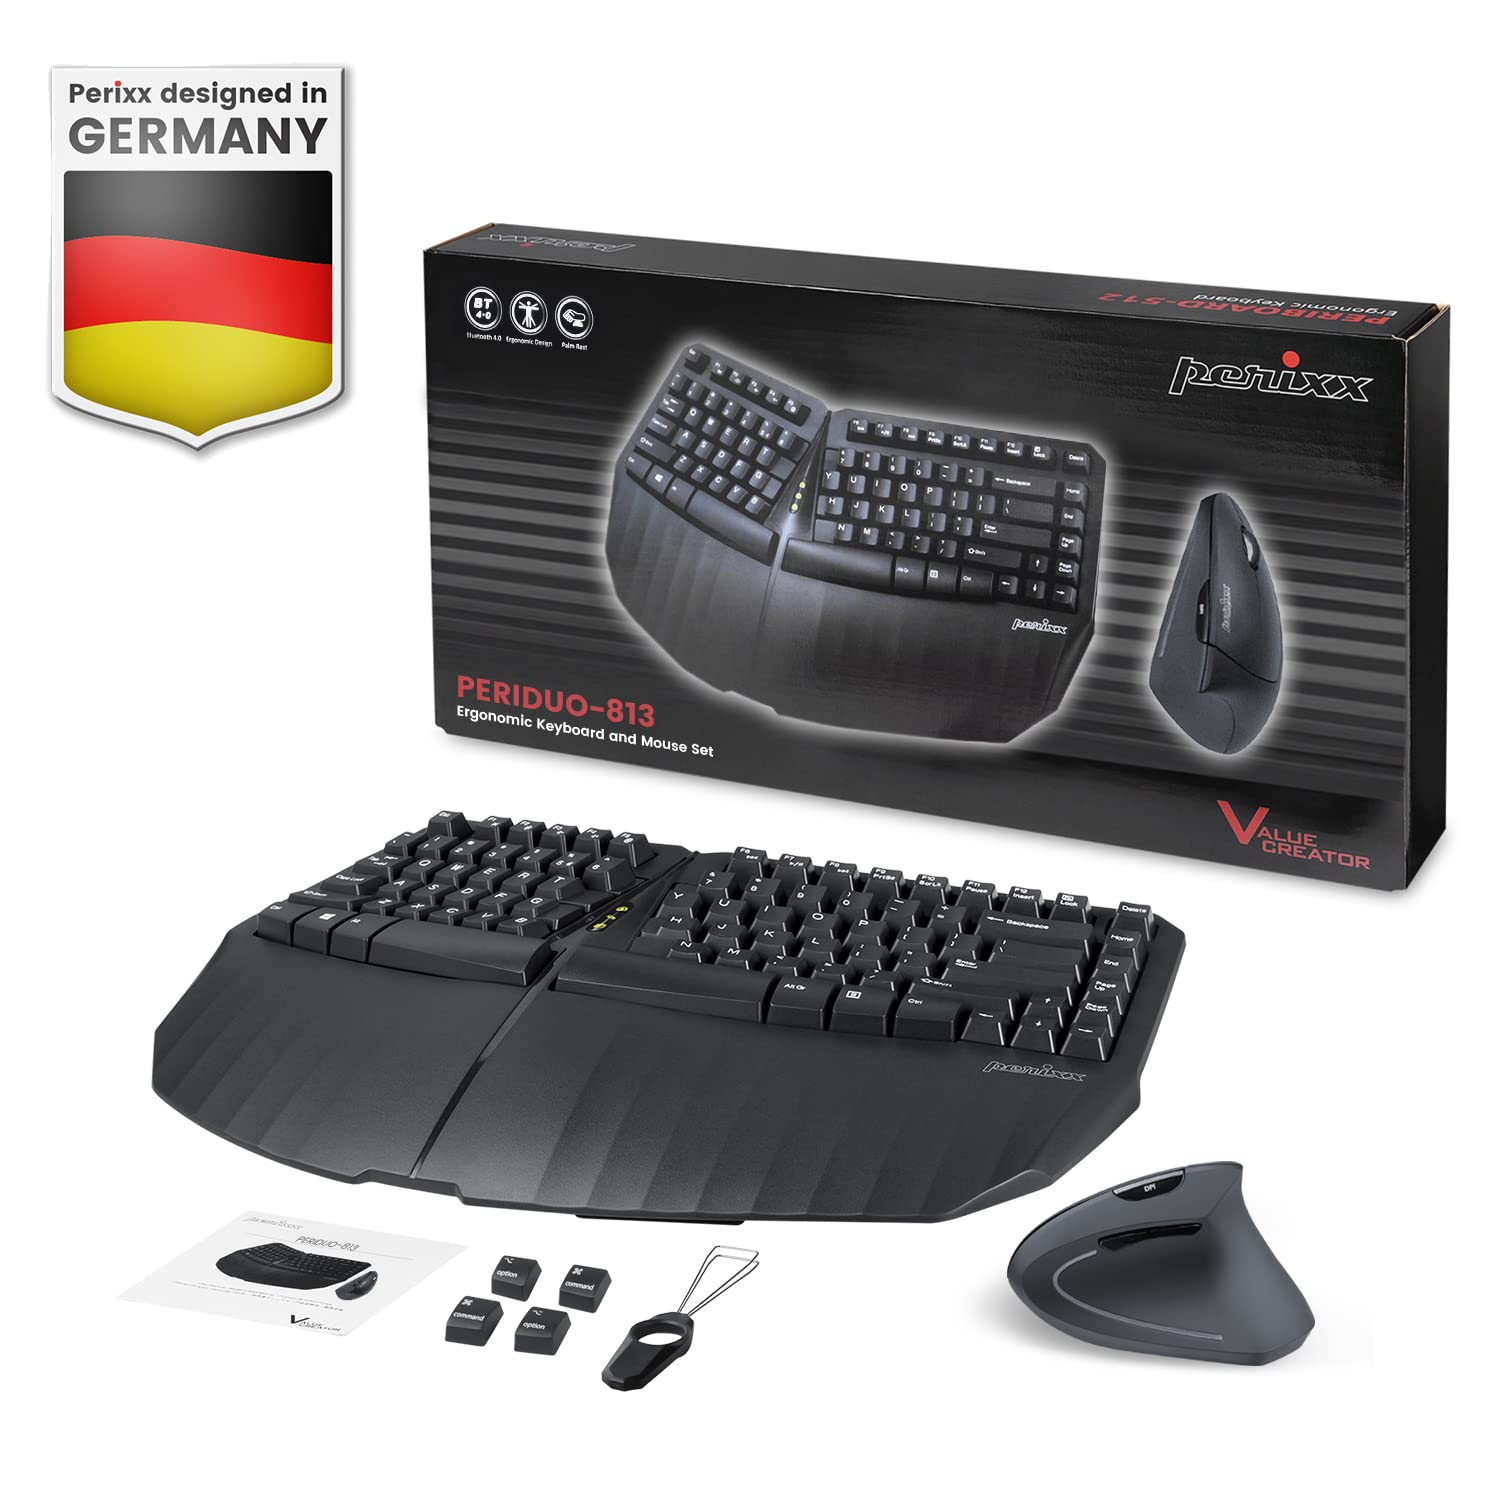 Perixx PERIDUO-813B US, Wireless Ergonomic Compact Keyboard & Vertical Mouse - Bundle with a 6-Button Ergonomic Vertical Mouse - Black - US English